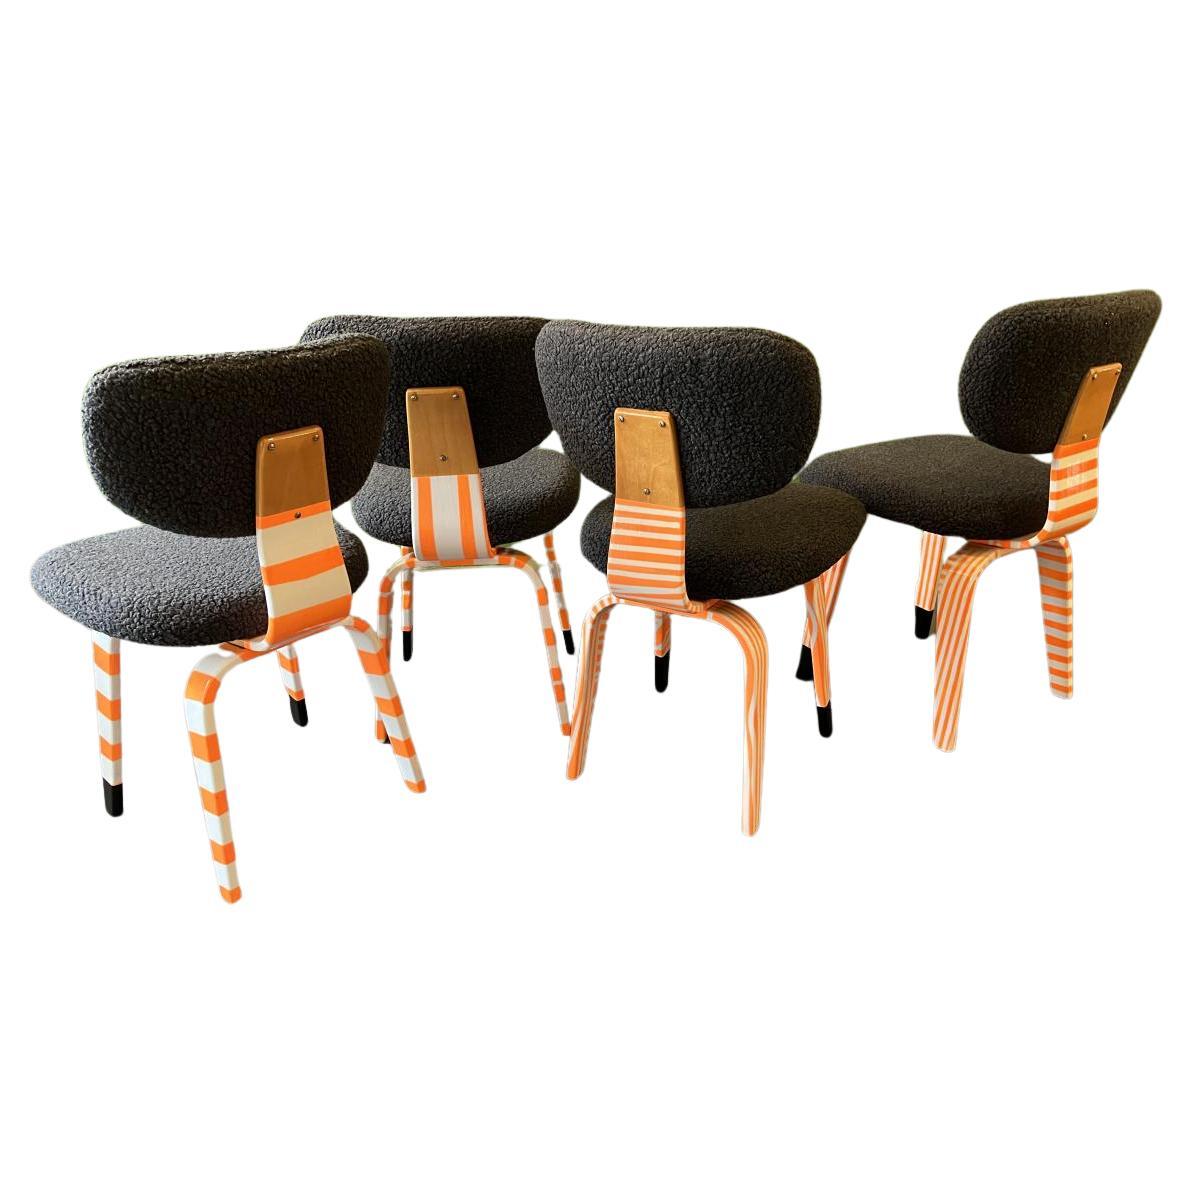 Cees Braakman Dining Chairs contemporized by Markus Friedrich Staab